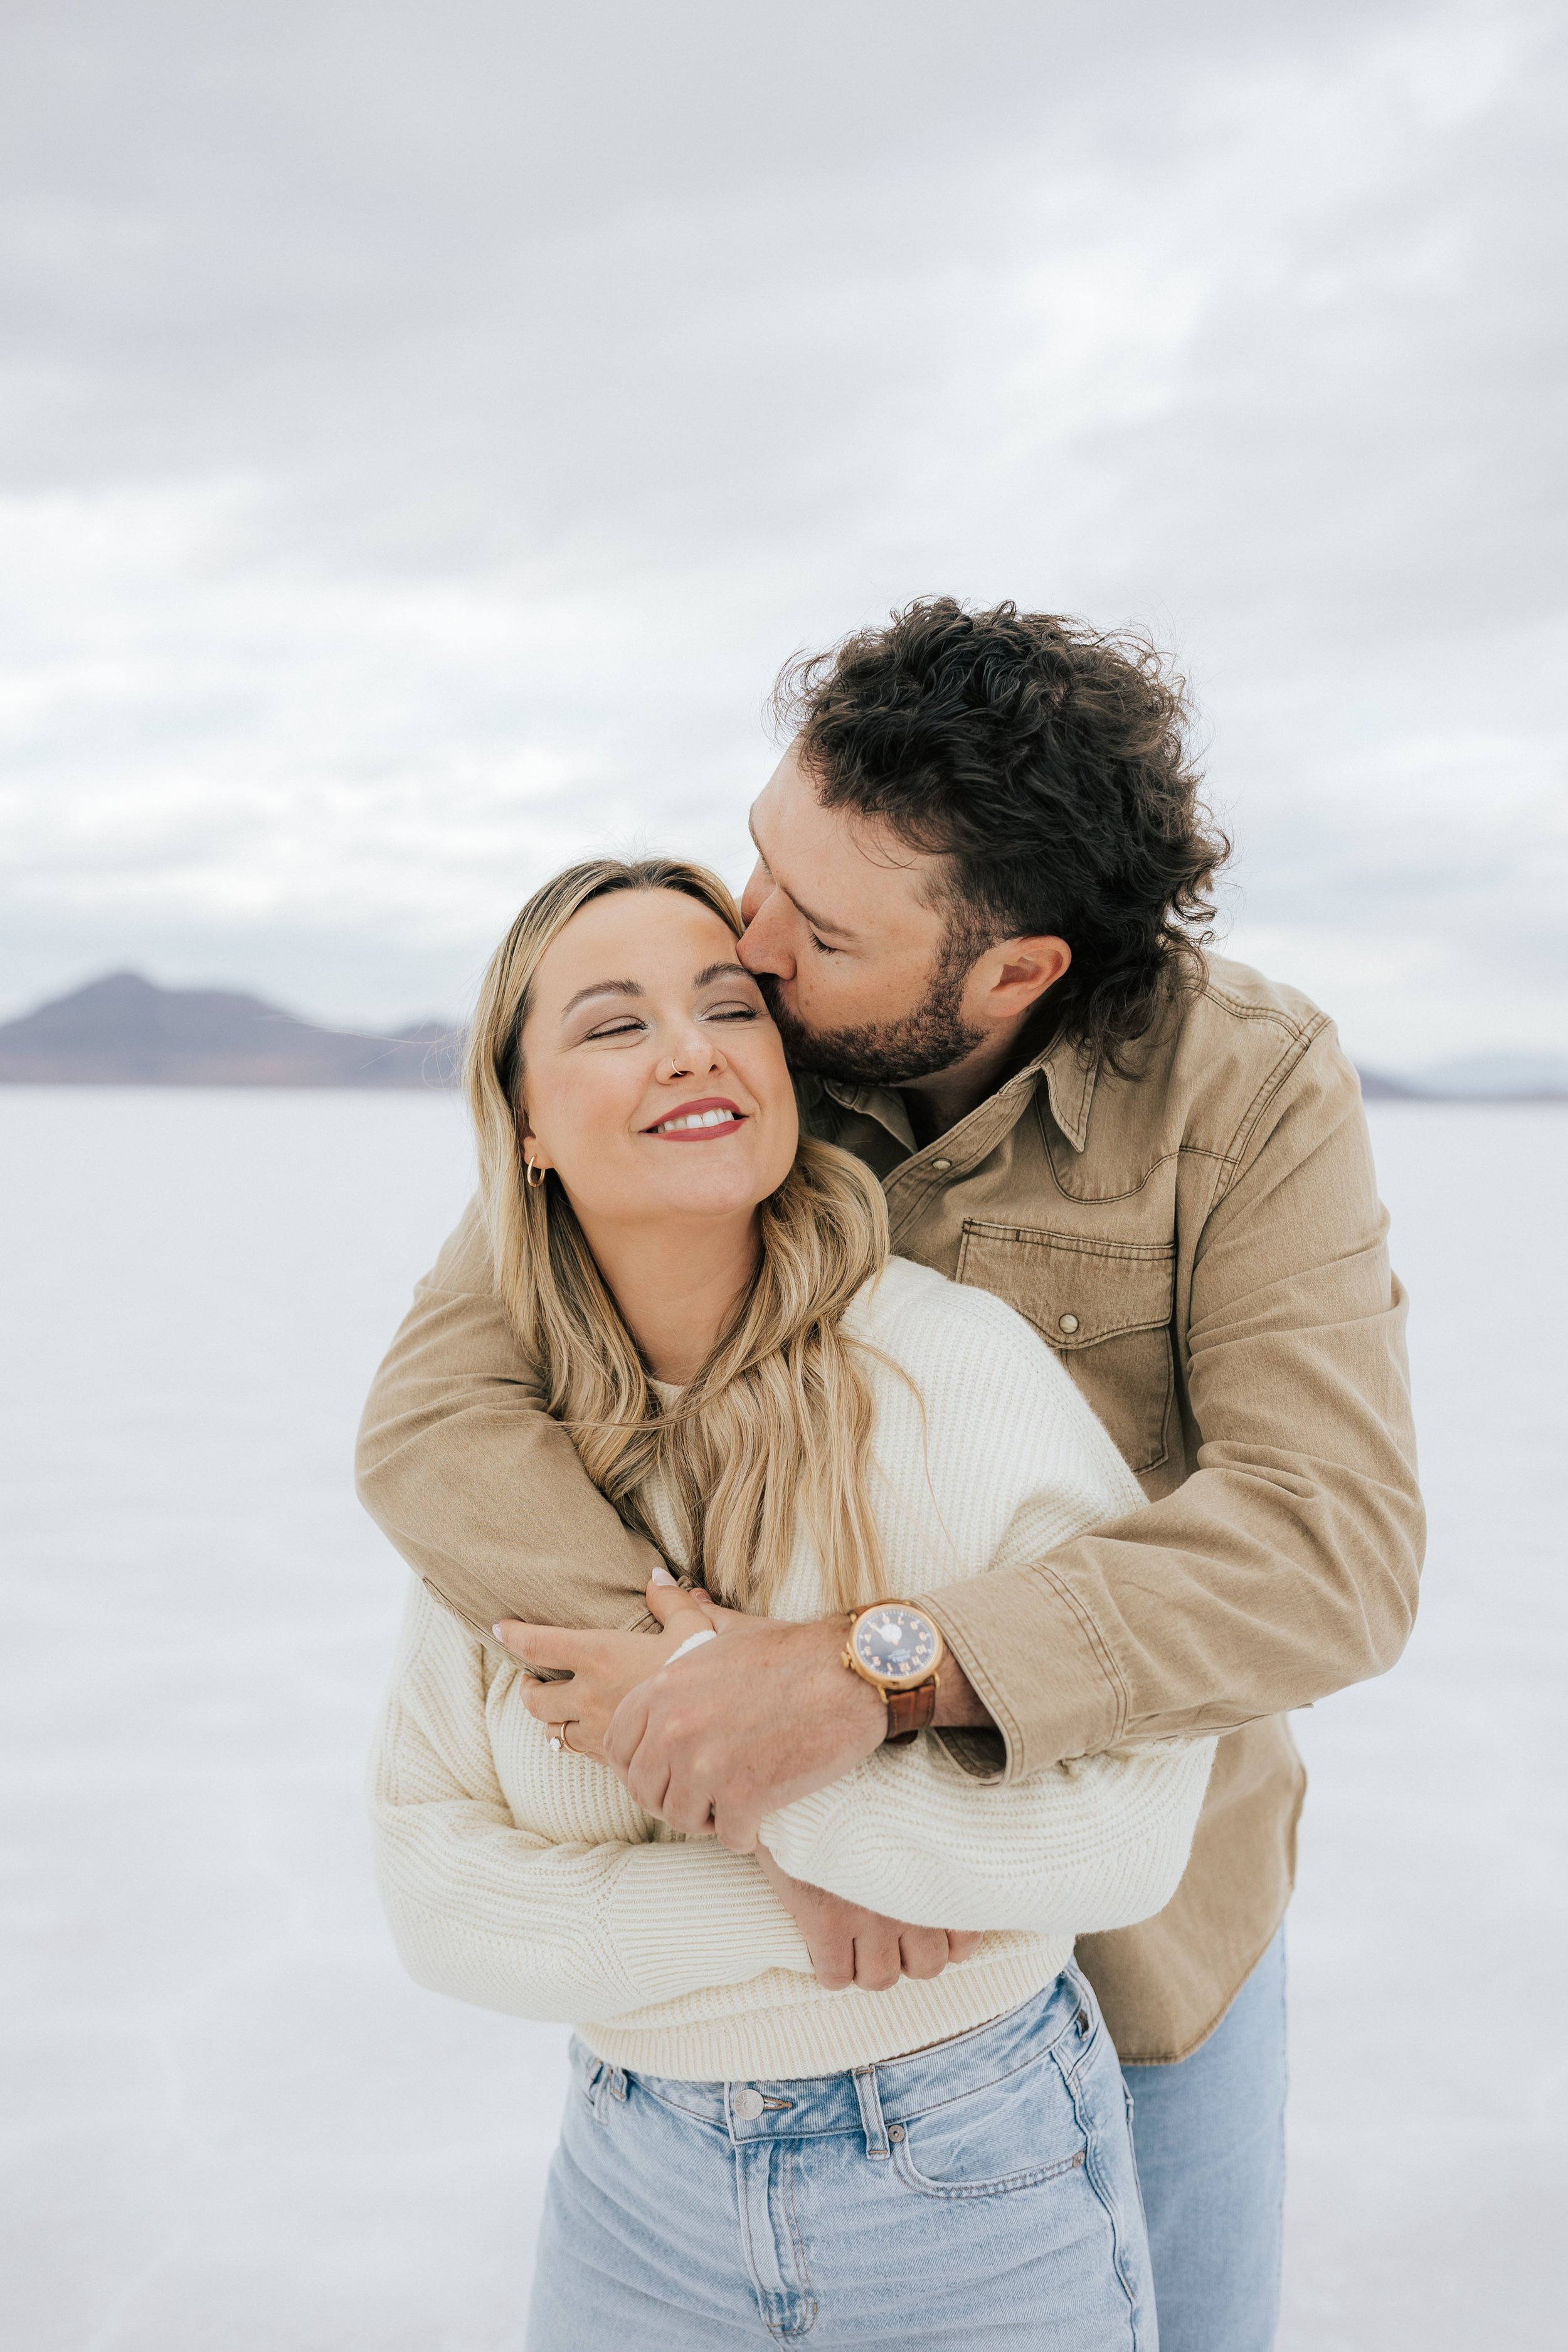  An engaged couple laughs and hugs as they pose for a photo at the Bonneville Salt Flats near Wendover, Nevada and Salt Lake City, Utah. The Salt Flats are white and the sky is overcast. The mountains show behind. Engagement session at the Utah Salt 